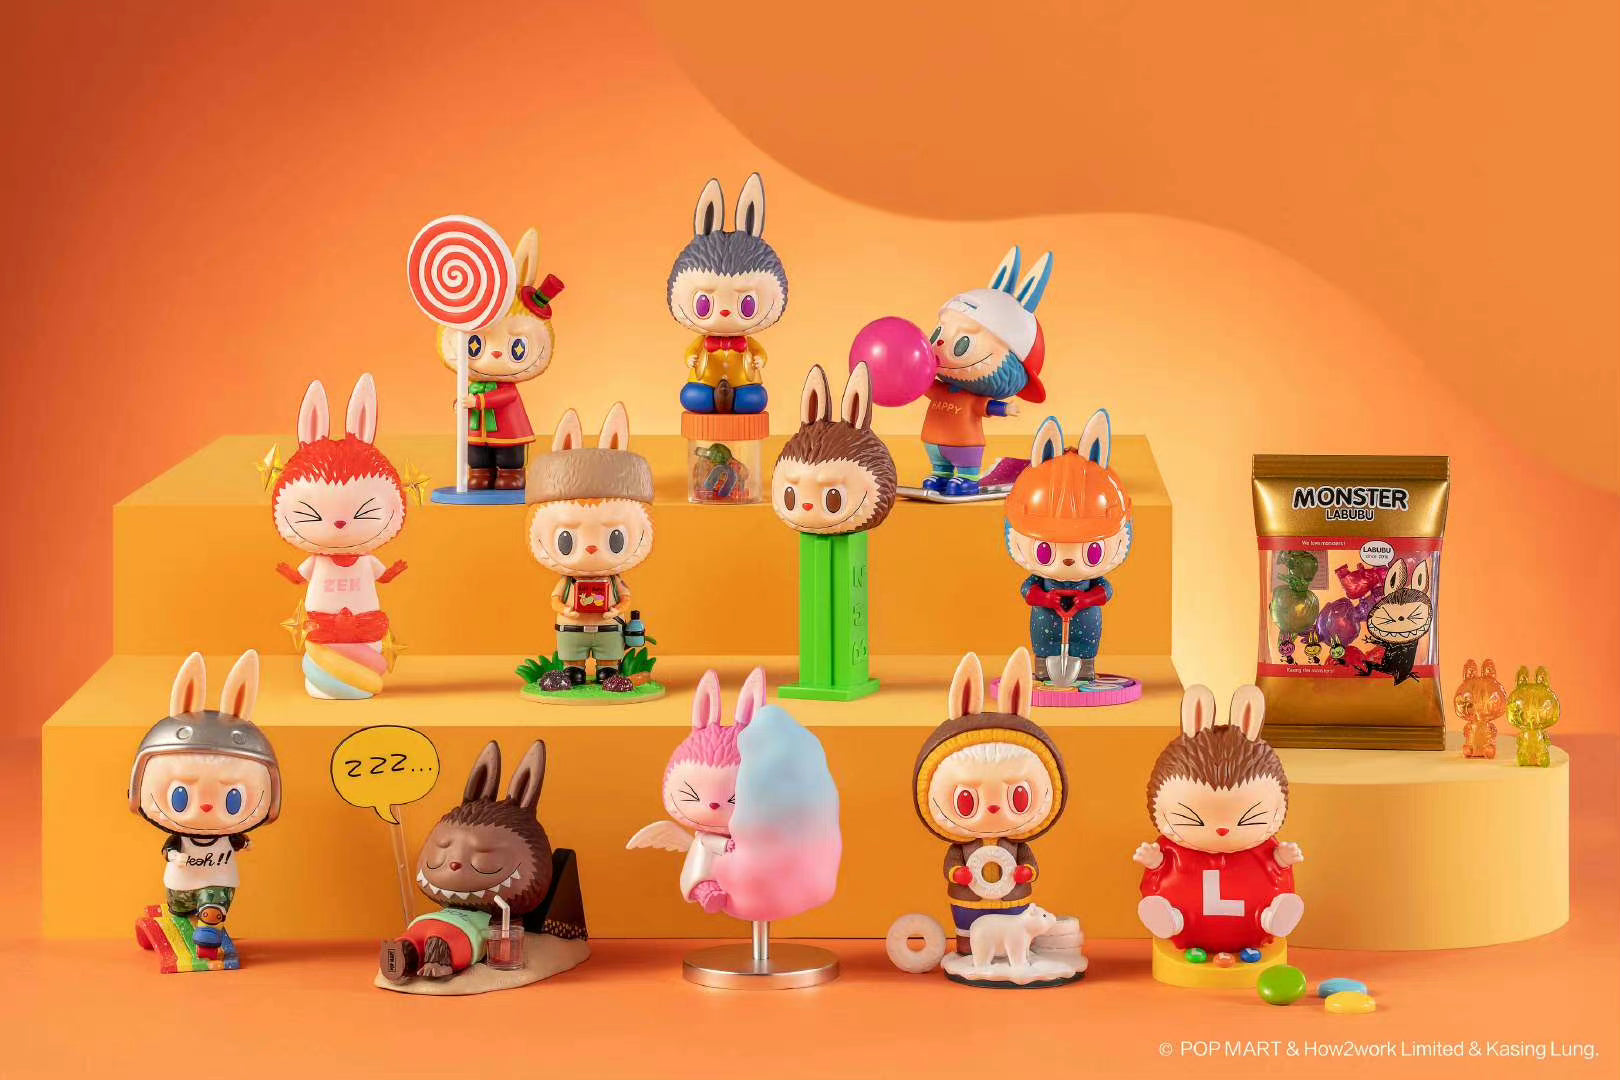 A group of toy figurines from The Monsters Candy Blind Box Series on display.